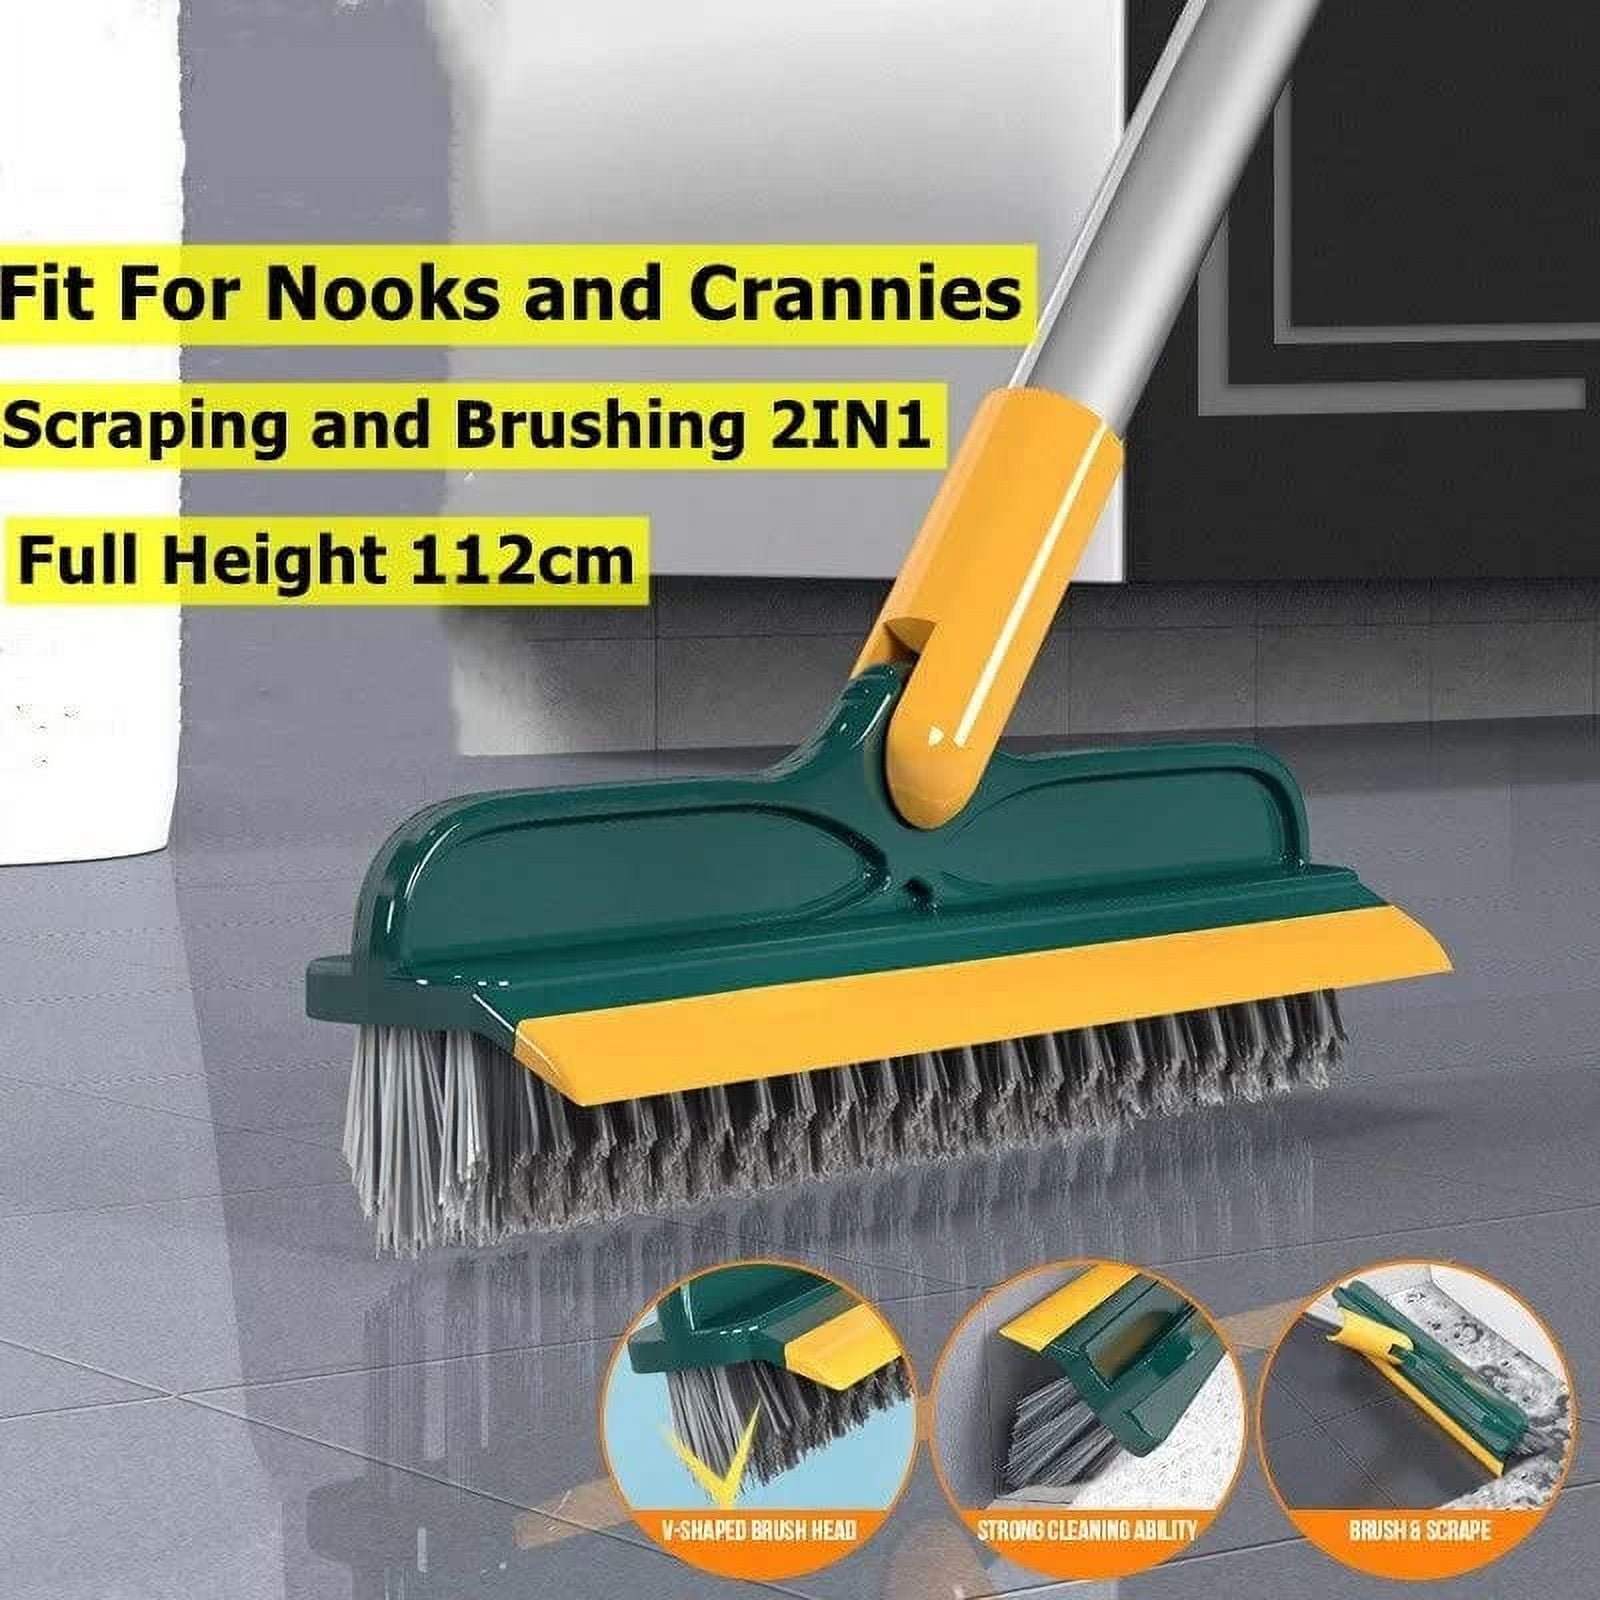  3 in 1 Floor Scrub Brush with Squeegee, Floor Brush Scrubber  with Long Handle, Bathroom Kitchen Crevice Cleaning Brush with Squeegee,  120° Triangular Rotating Brush Head for Cleaning Wall Deck Tile 